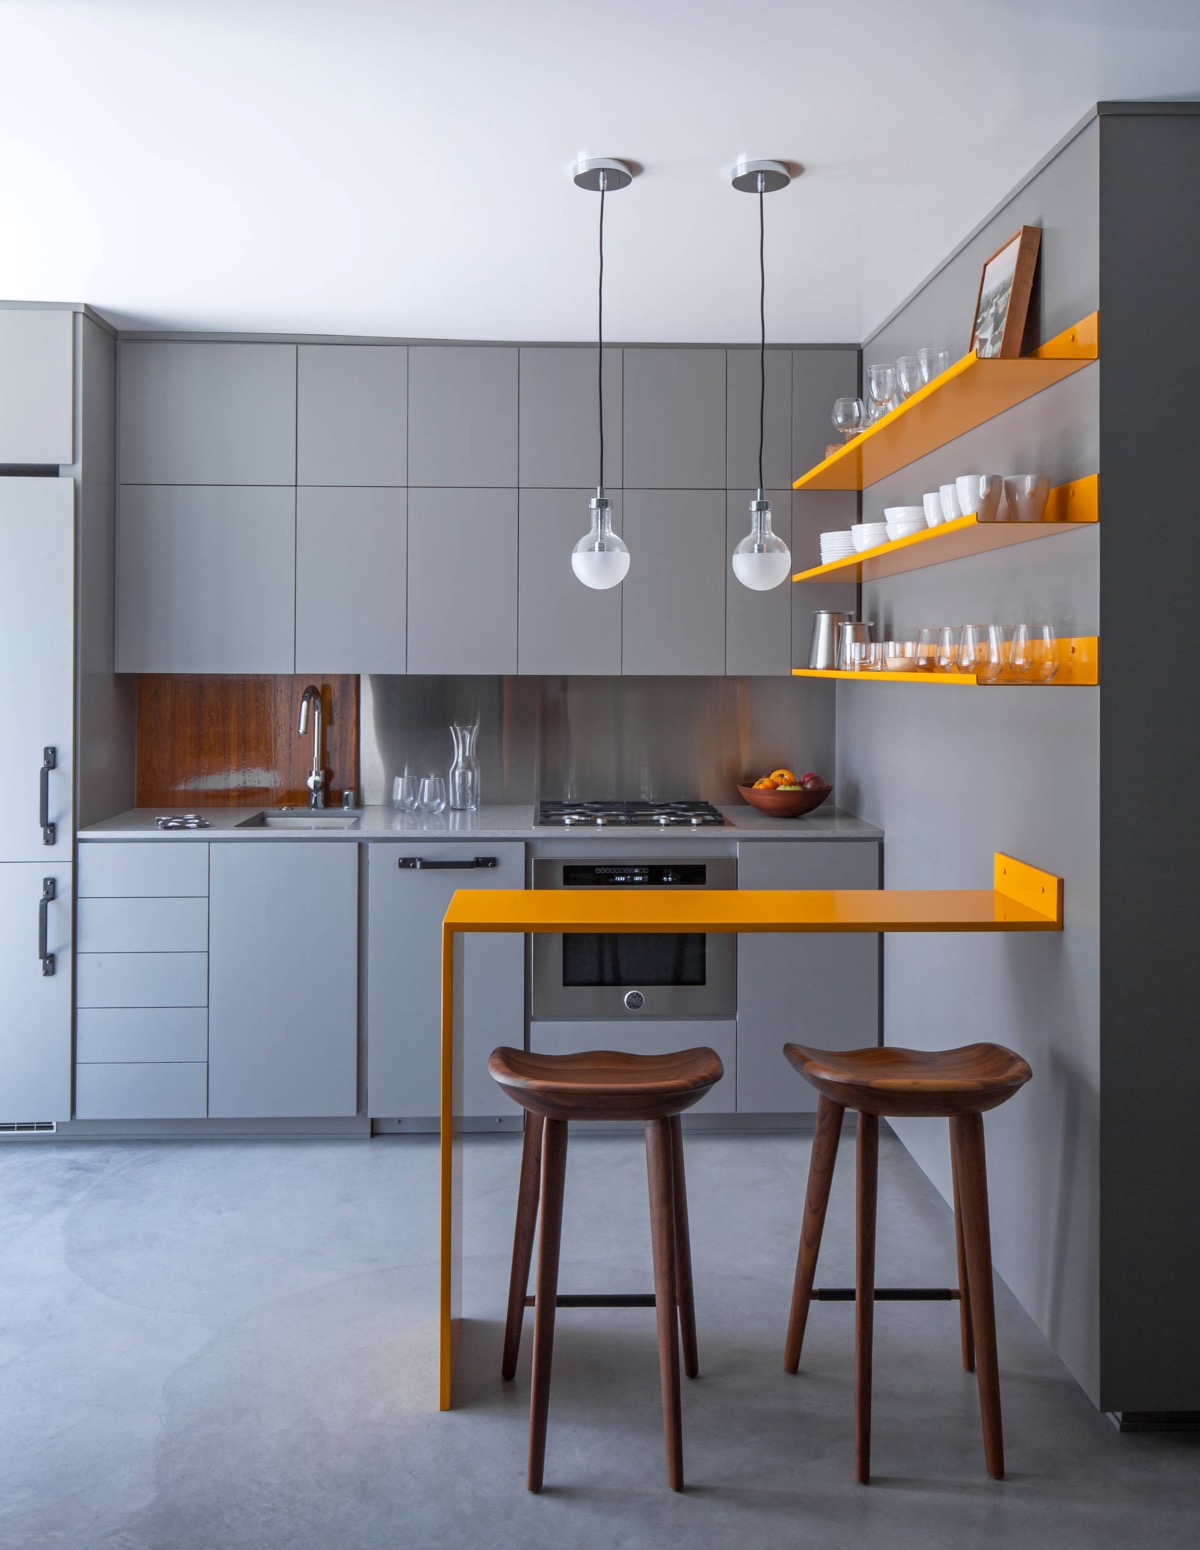 18 Splendid Small Kitchens And Ideas You Can Use From Them